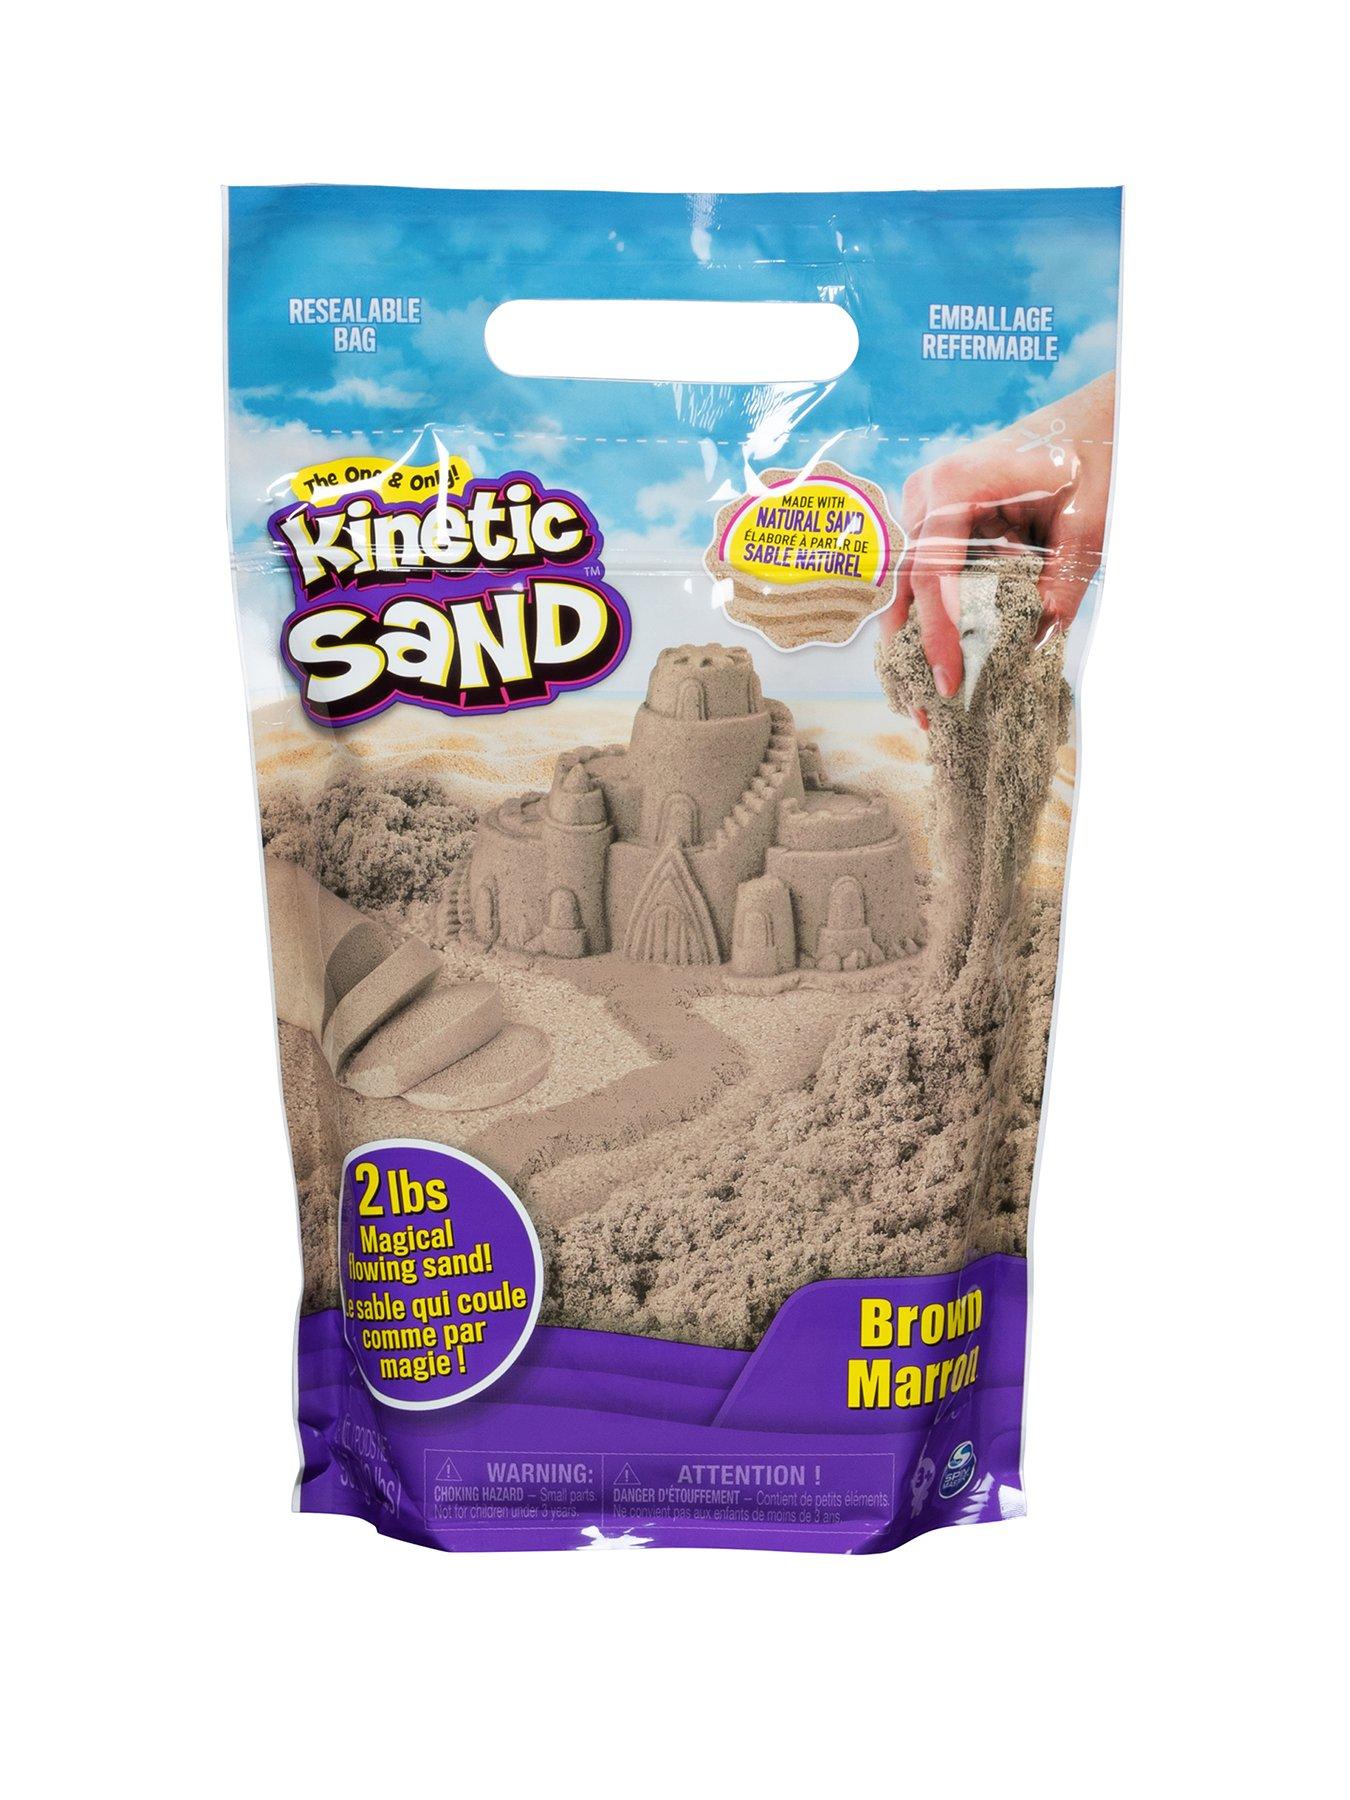 Kinetic Sand Mold n Flow, 1.5lbs Red and Teal Play Sand, 3 Tools Sensory  Toys for Kids Ages 3+